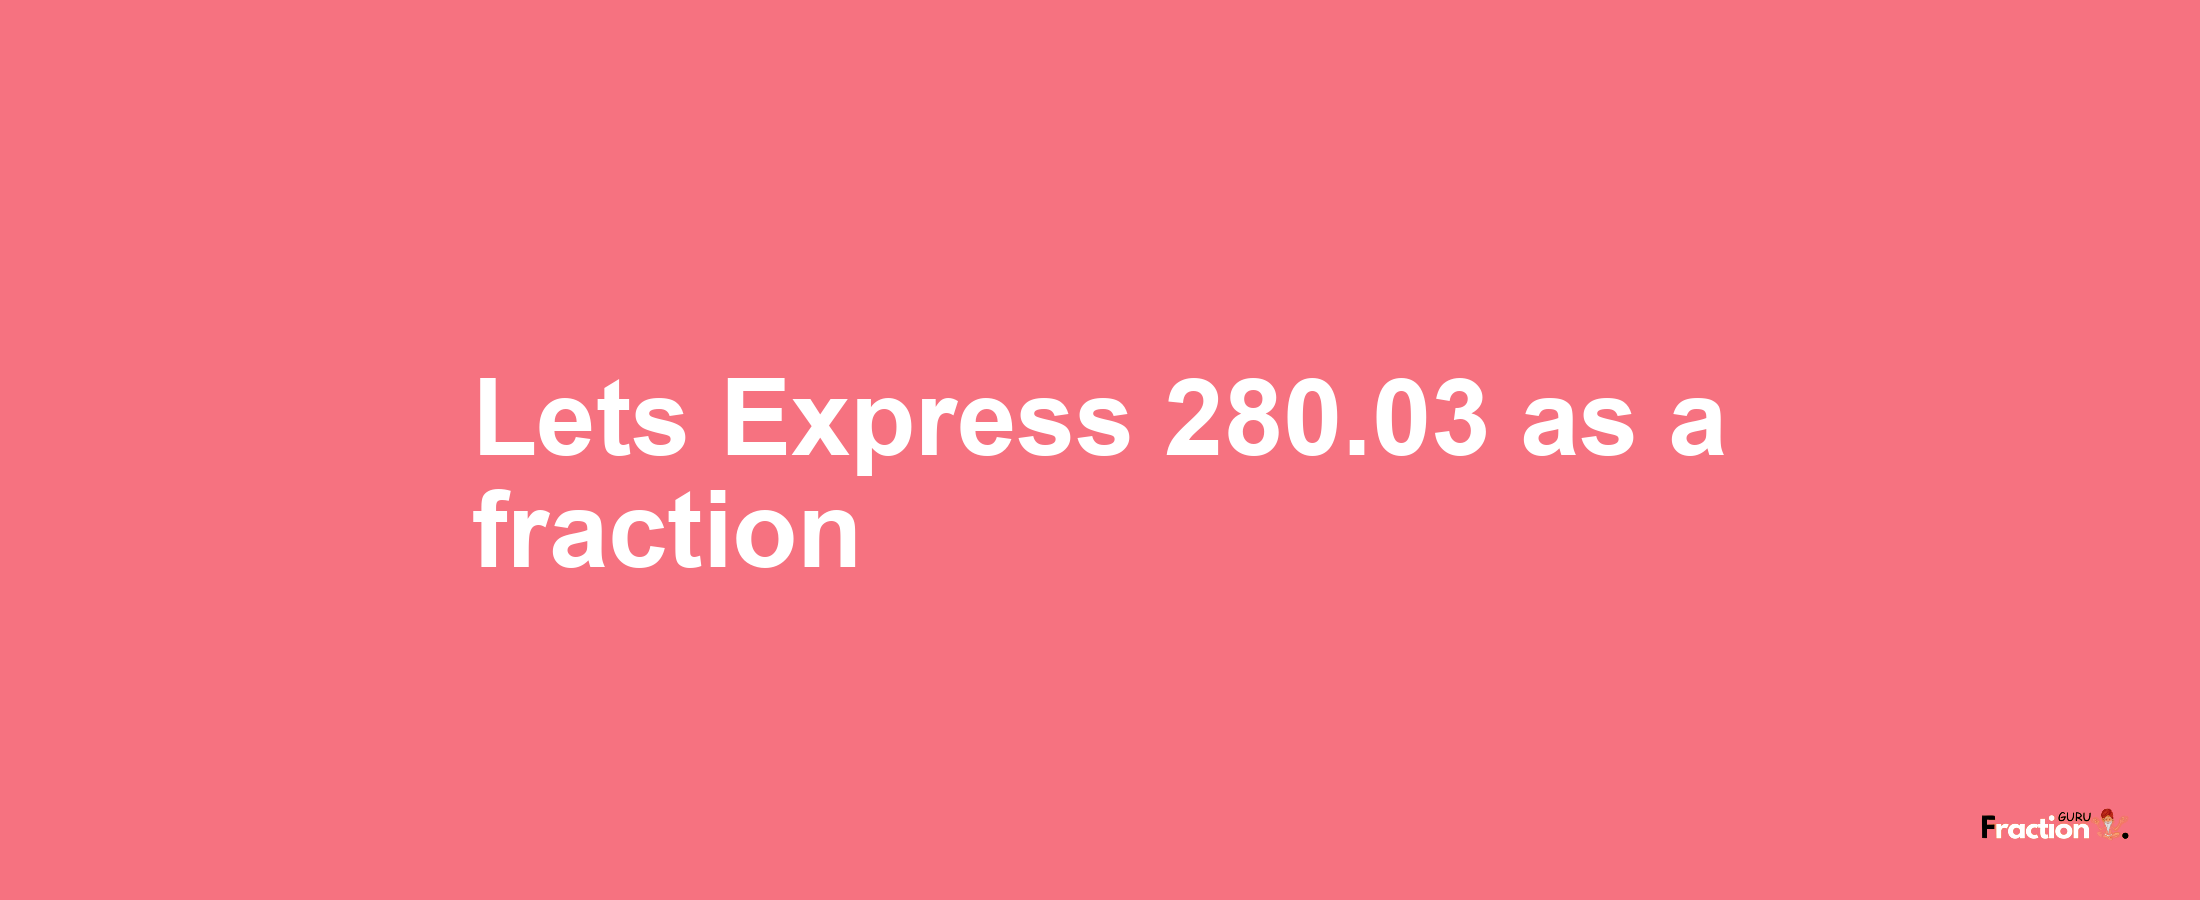 Lets Express 280.03 as afraction